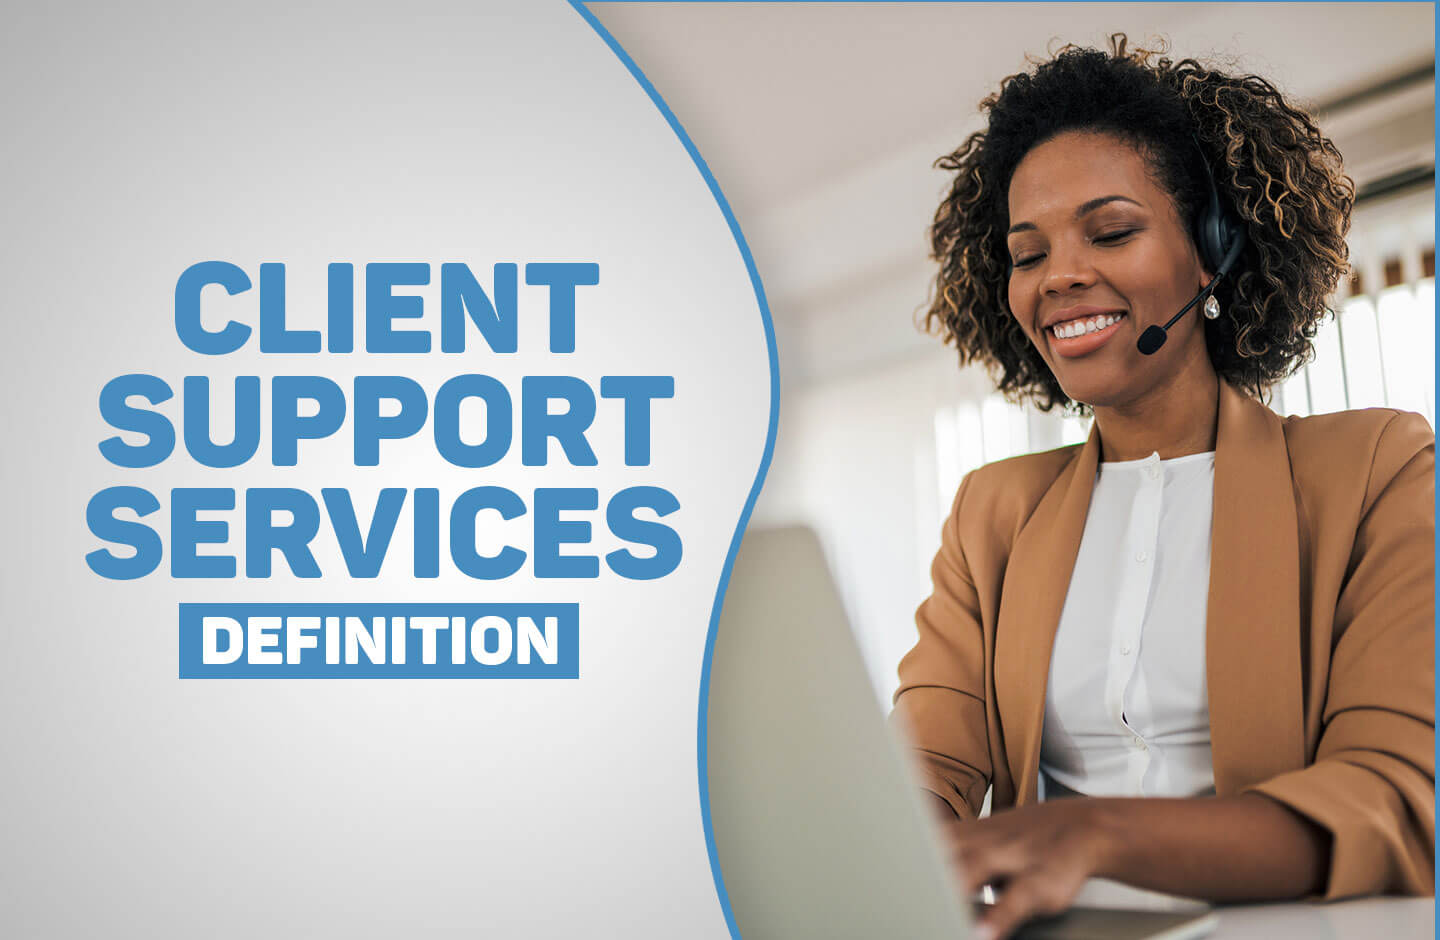 Client Support Services Definition: What is it & How Does it Work?